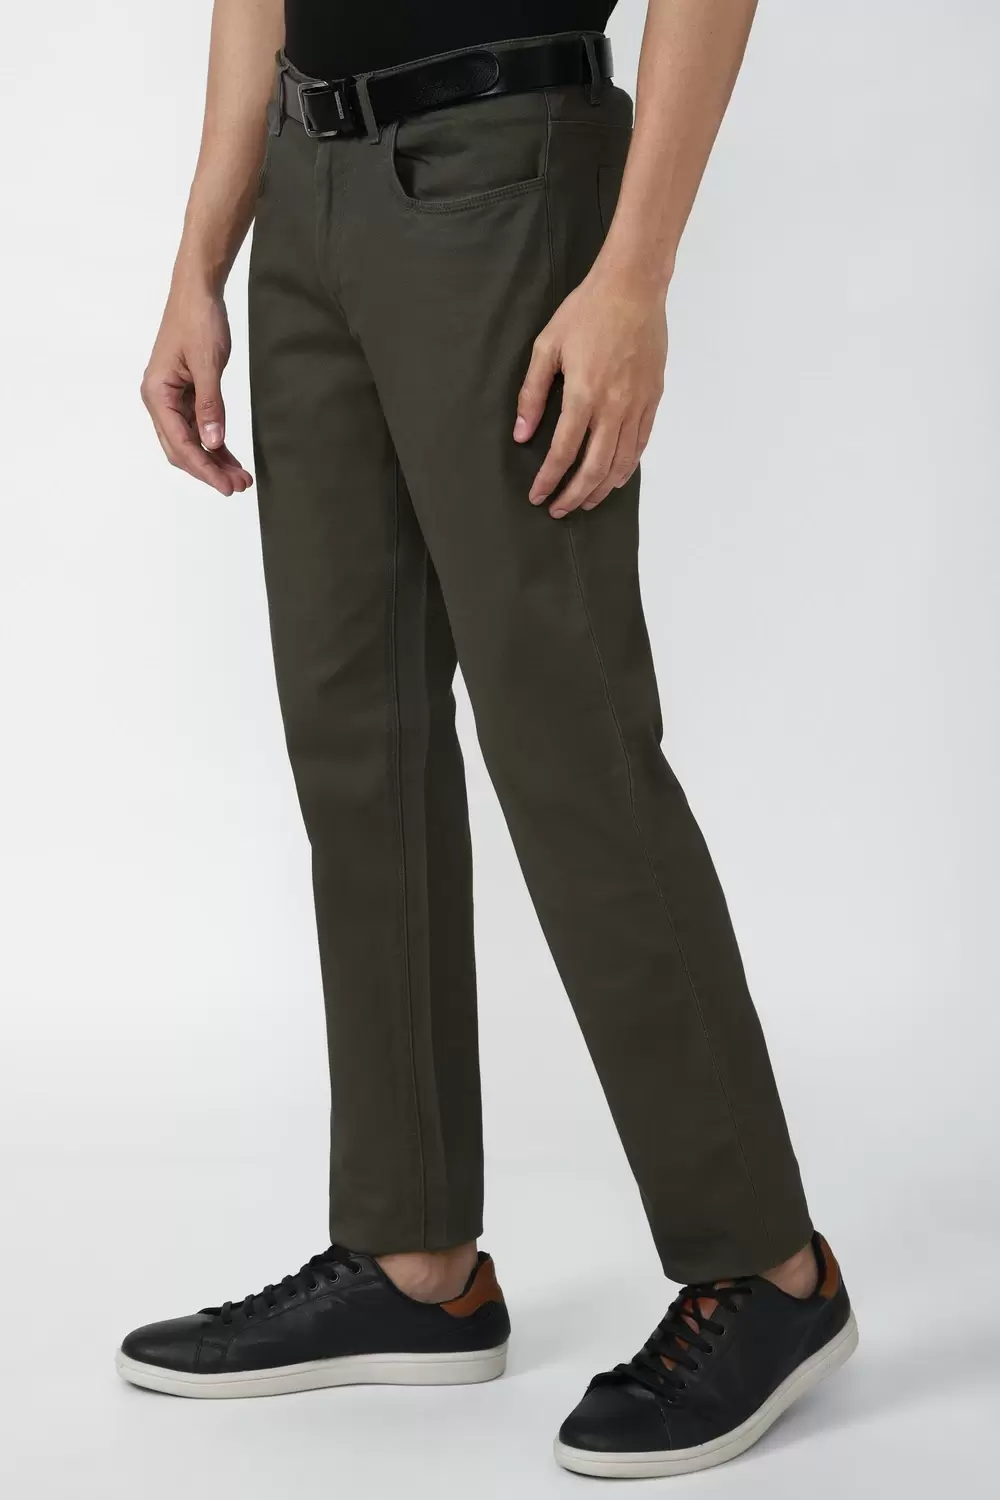 Peter England Casuals Trousers & Chinos, Peter England Beige Trousers for  Men at Peterengland.com